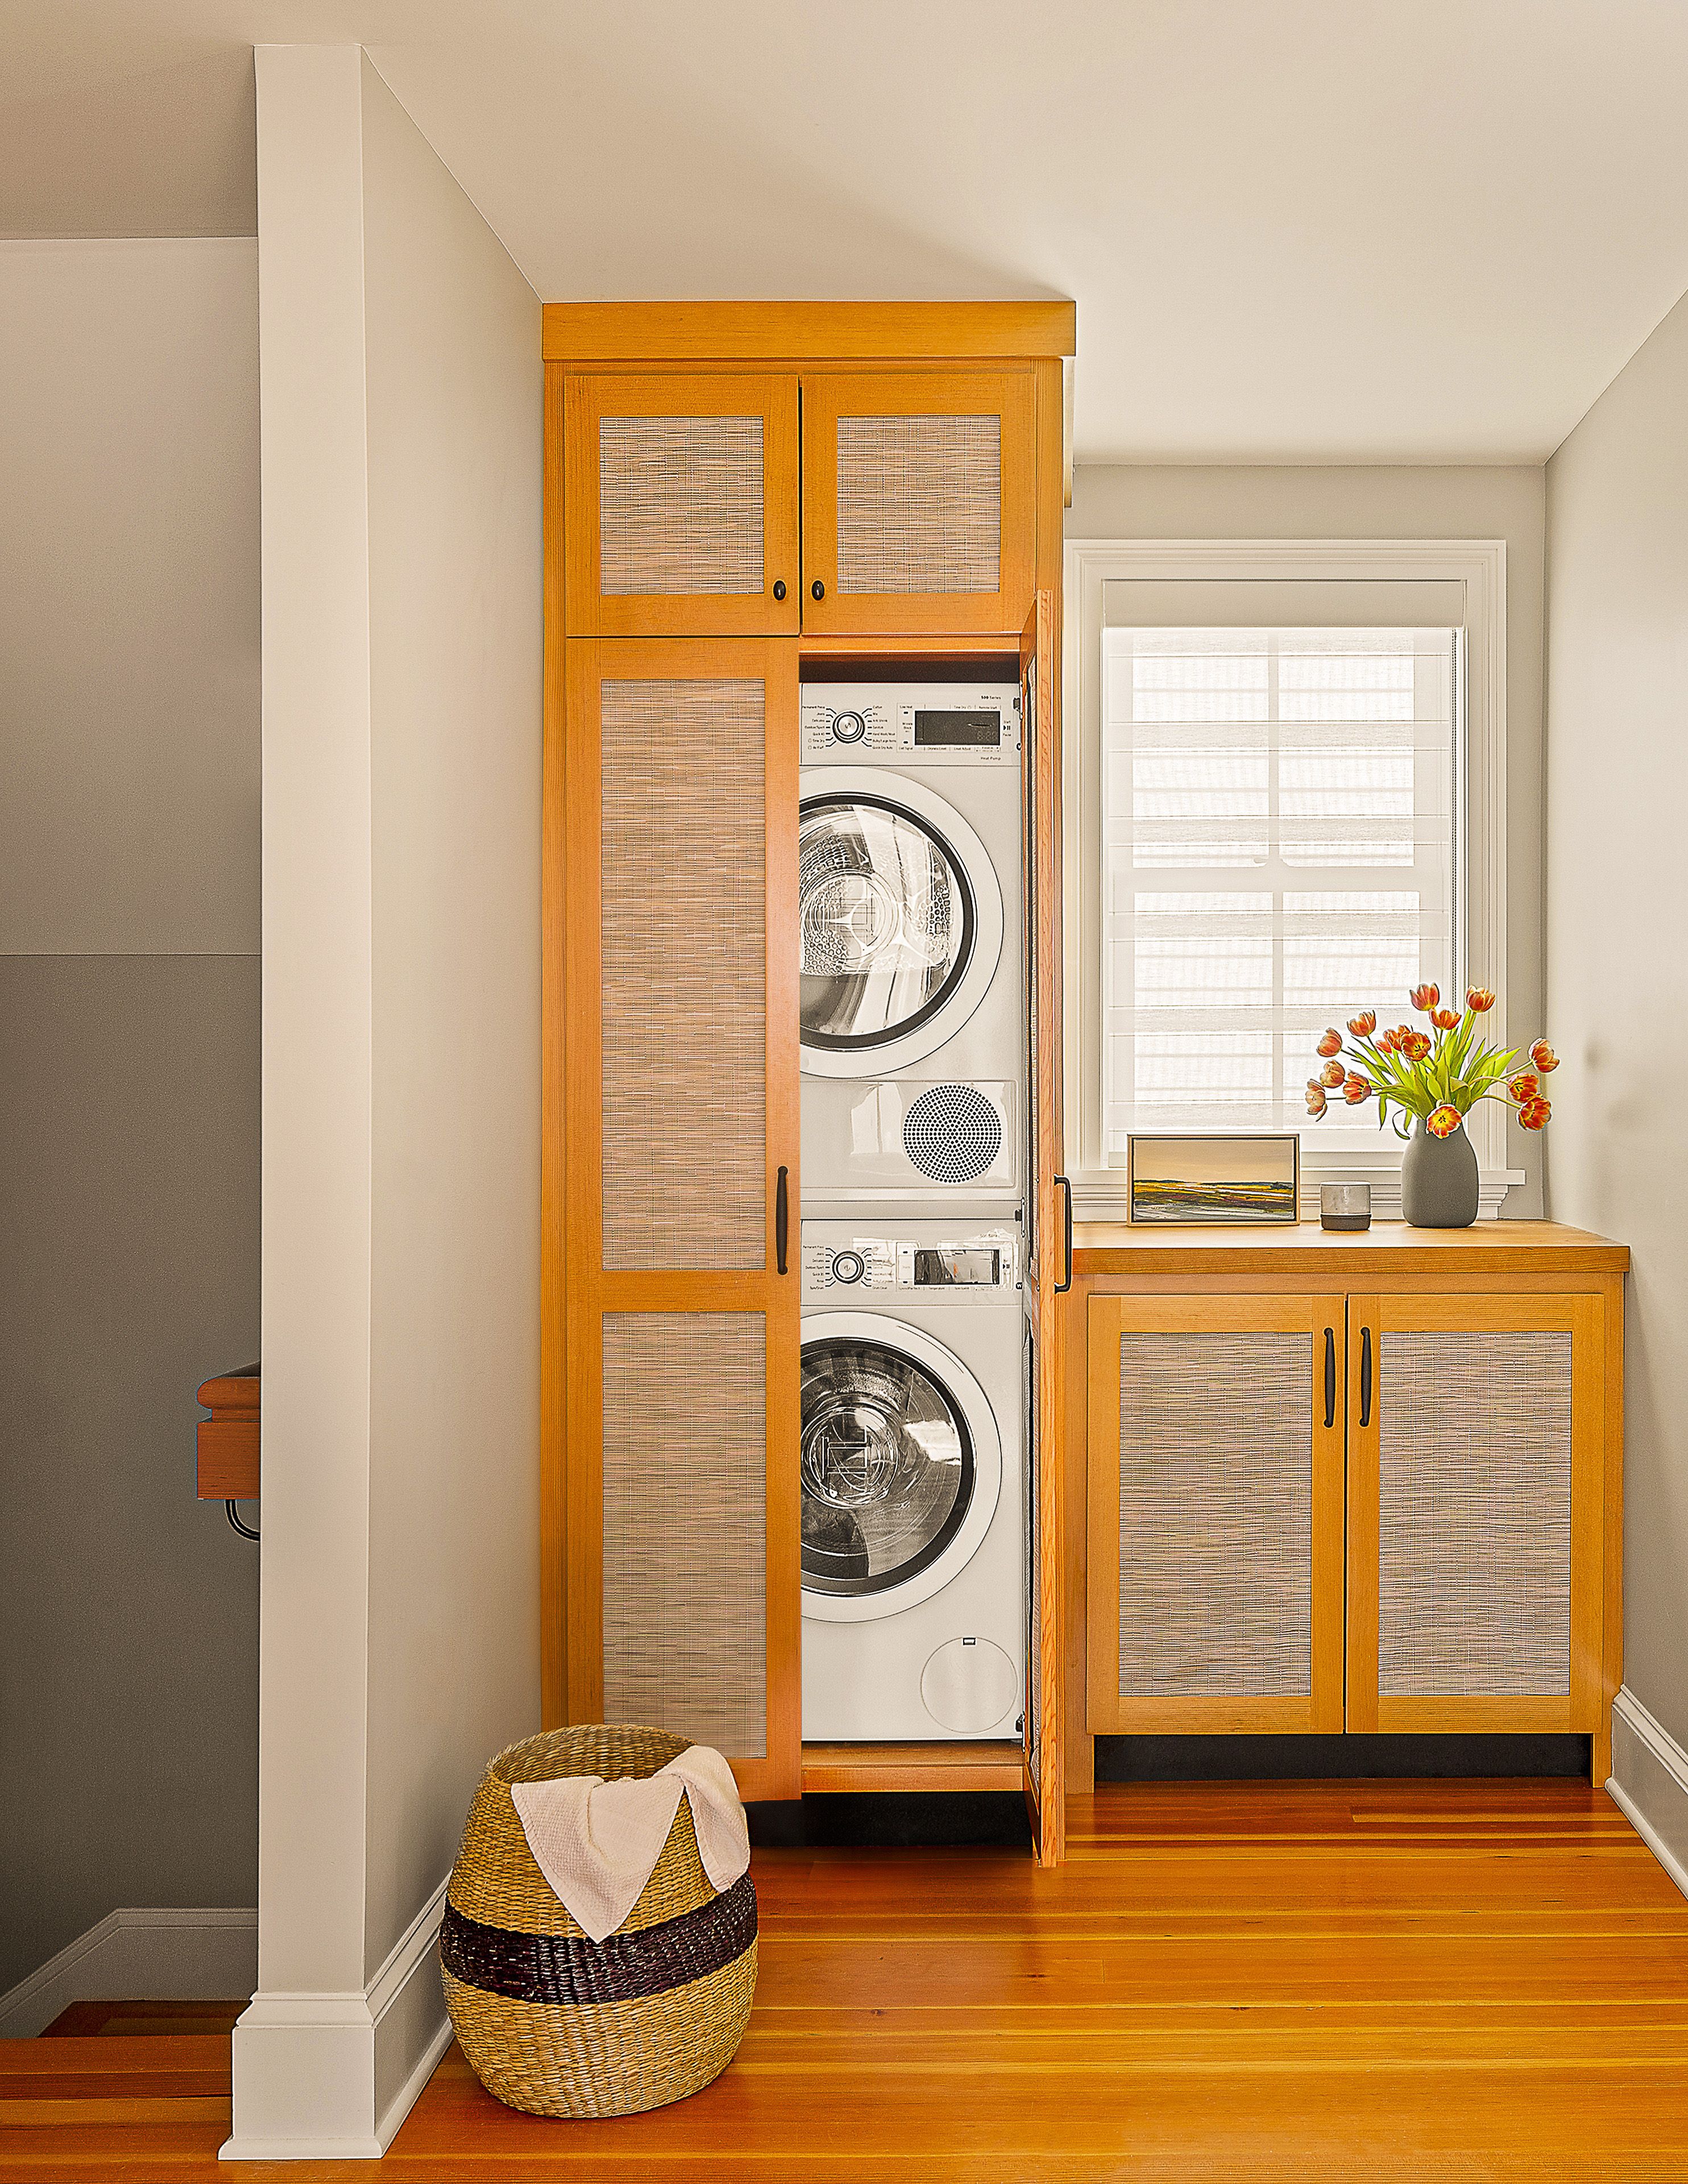 8 Small Laundry Room Storage Ideas That Make the Most of a Tight Space